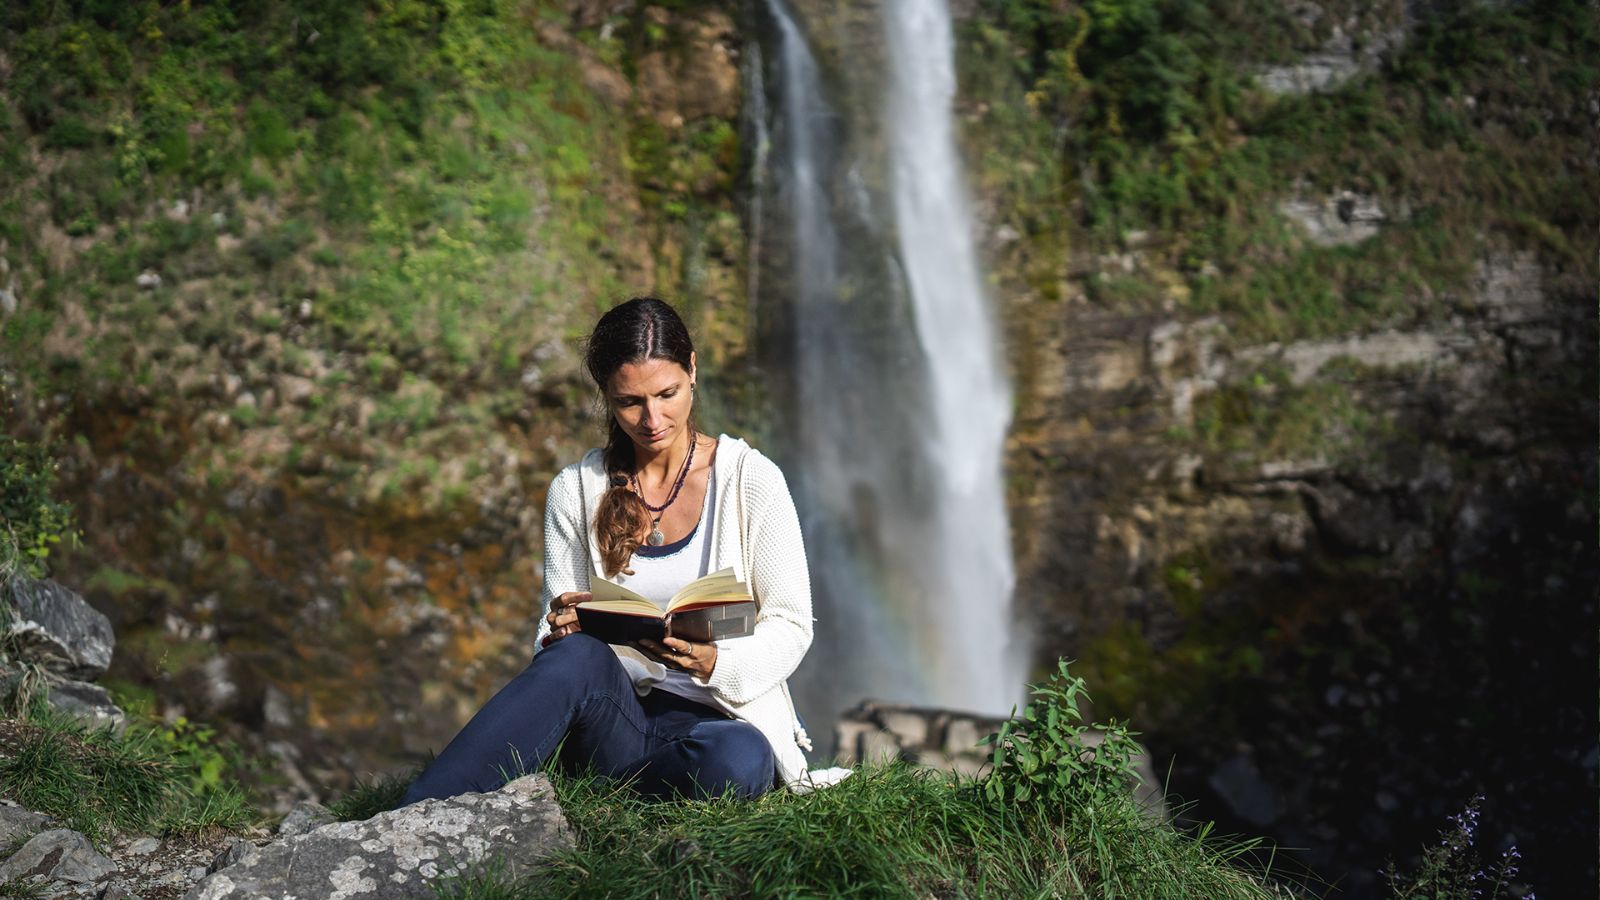 A moment to read and relax at the Botto waterfall